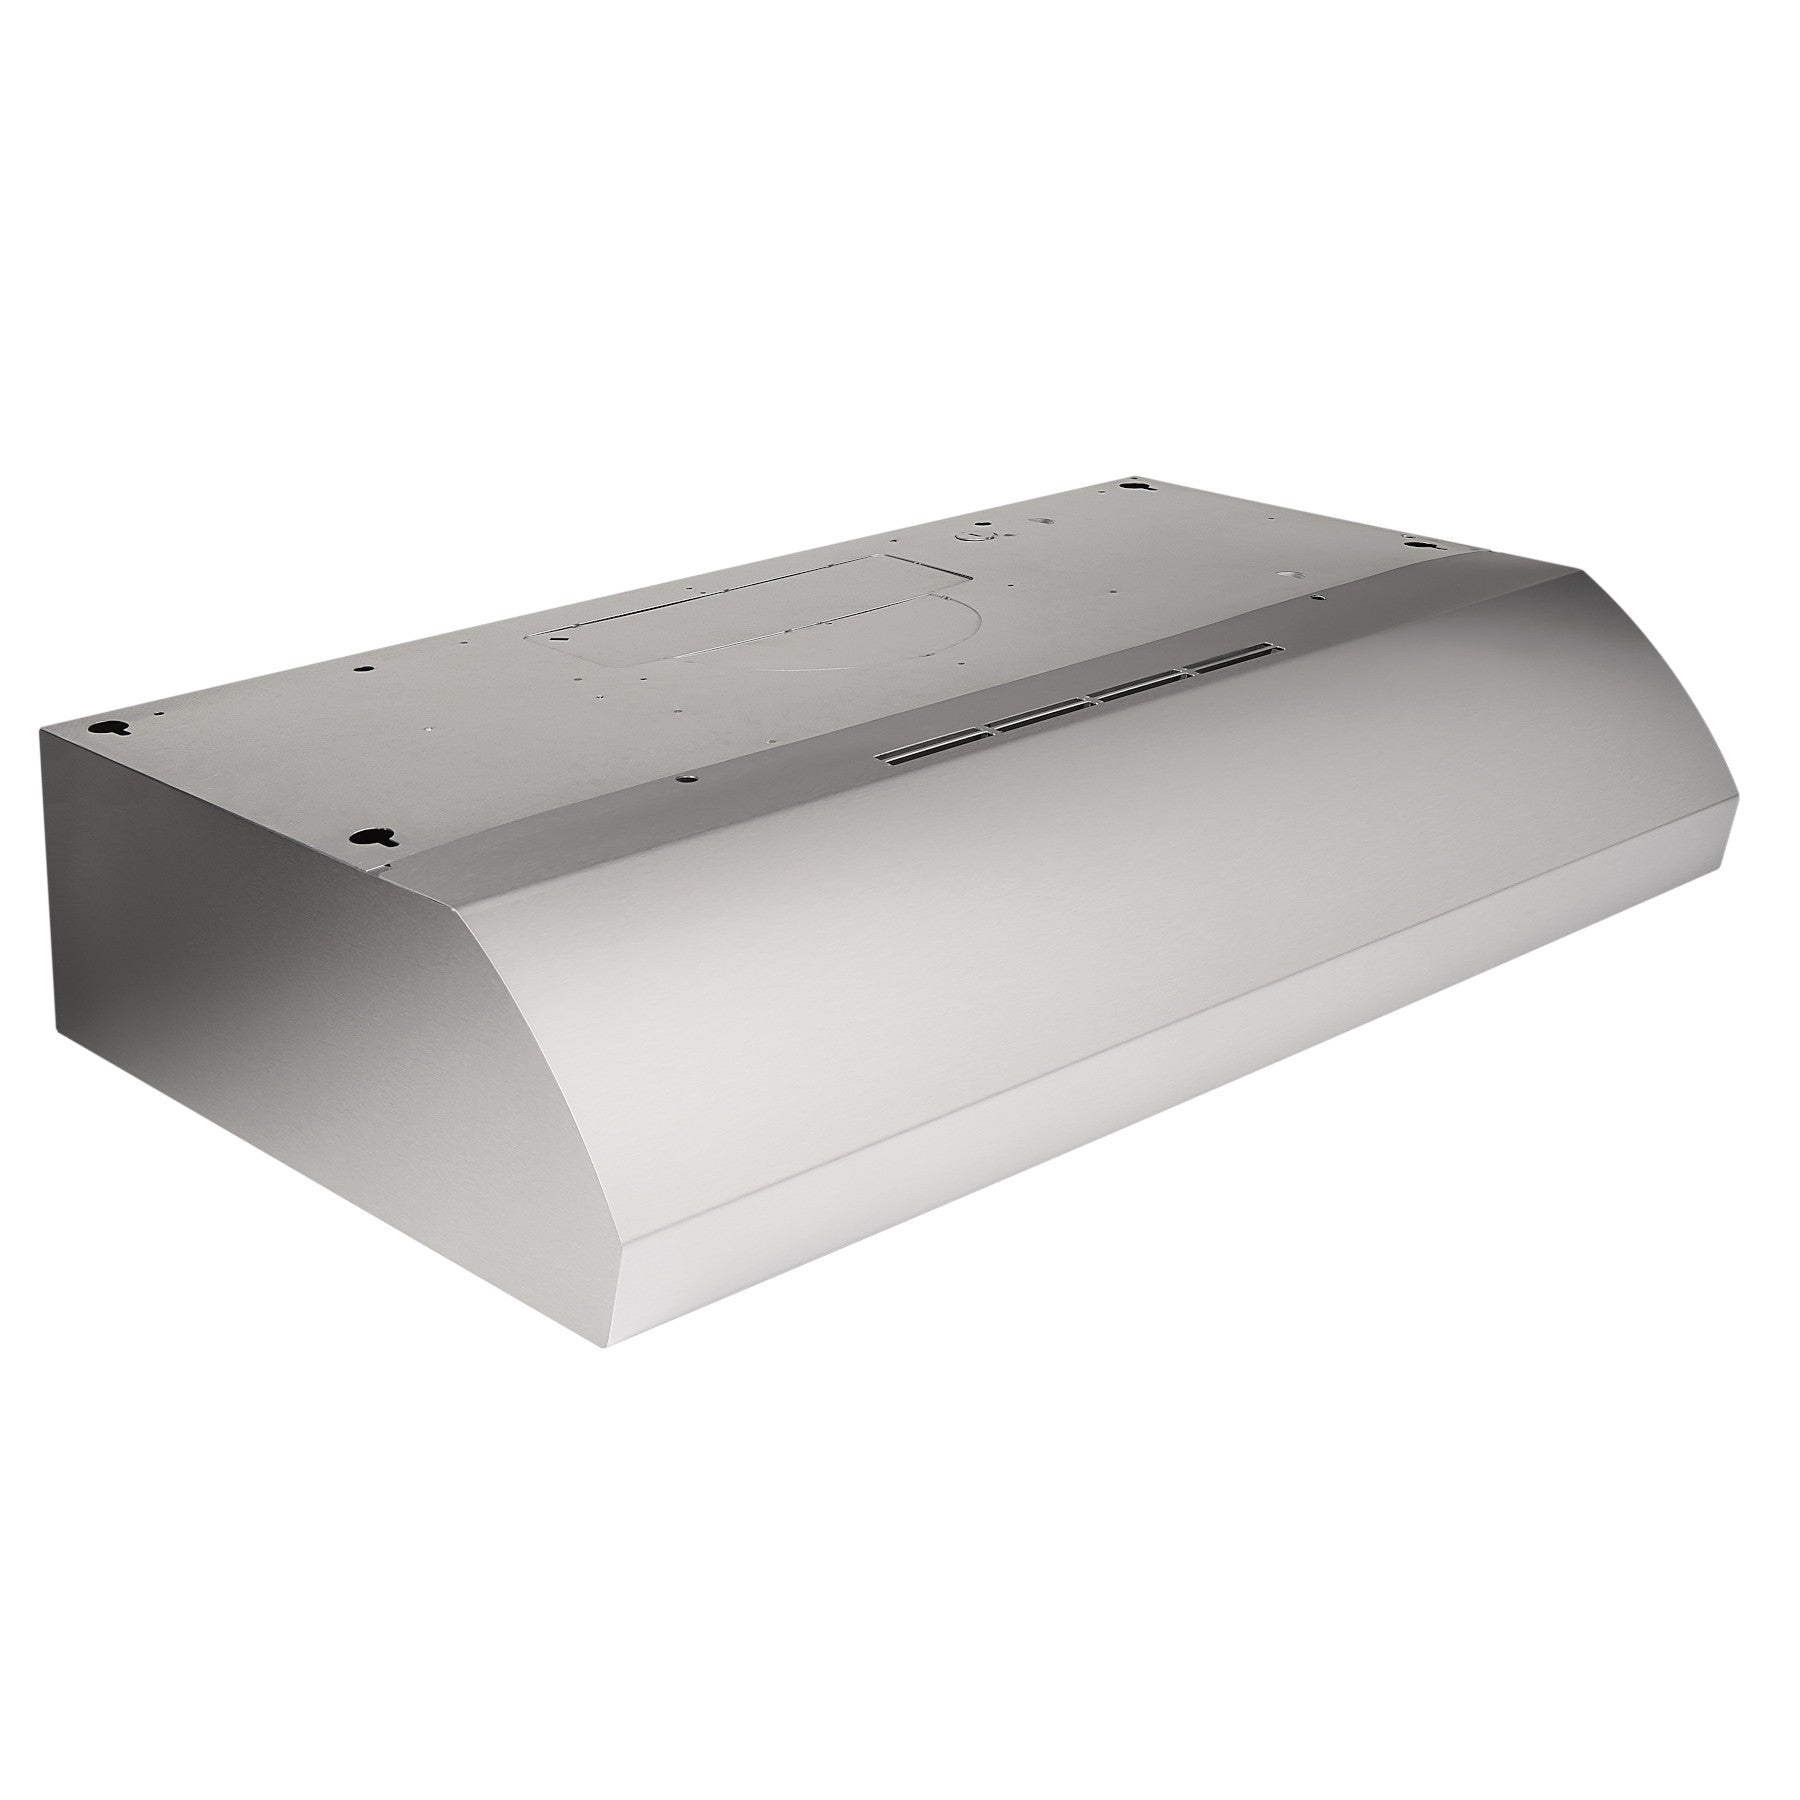 Broan - 30 Inch 270 CFM Under Cabinet Range Vent in Stainless - BXT130SSC